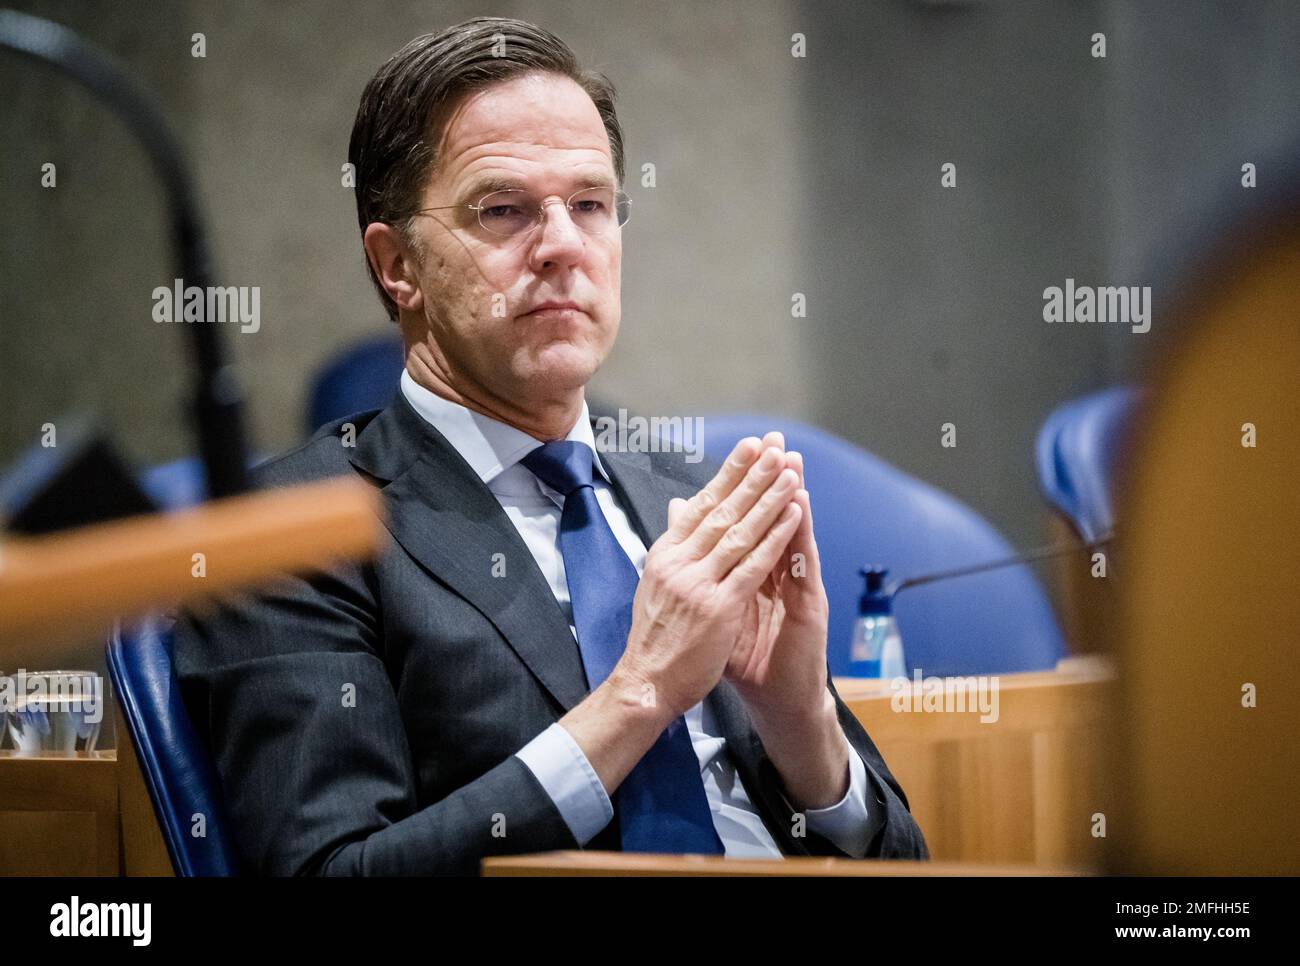 THE HAGUE - (VLNR) Prime Minister Mark Rutte, during a debate about apologies for the Dutch slavery past and an awareness fund to be set up in the House of Representatives. ANP BART MAAT netherlands out - belgium out Stock Photo